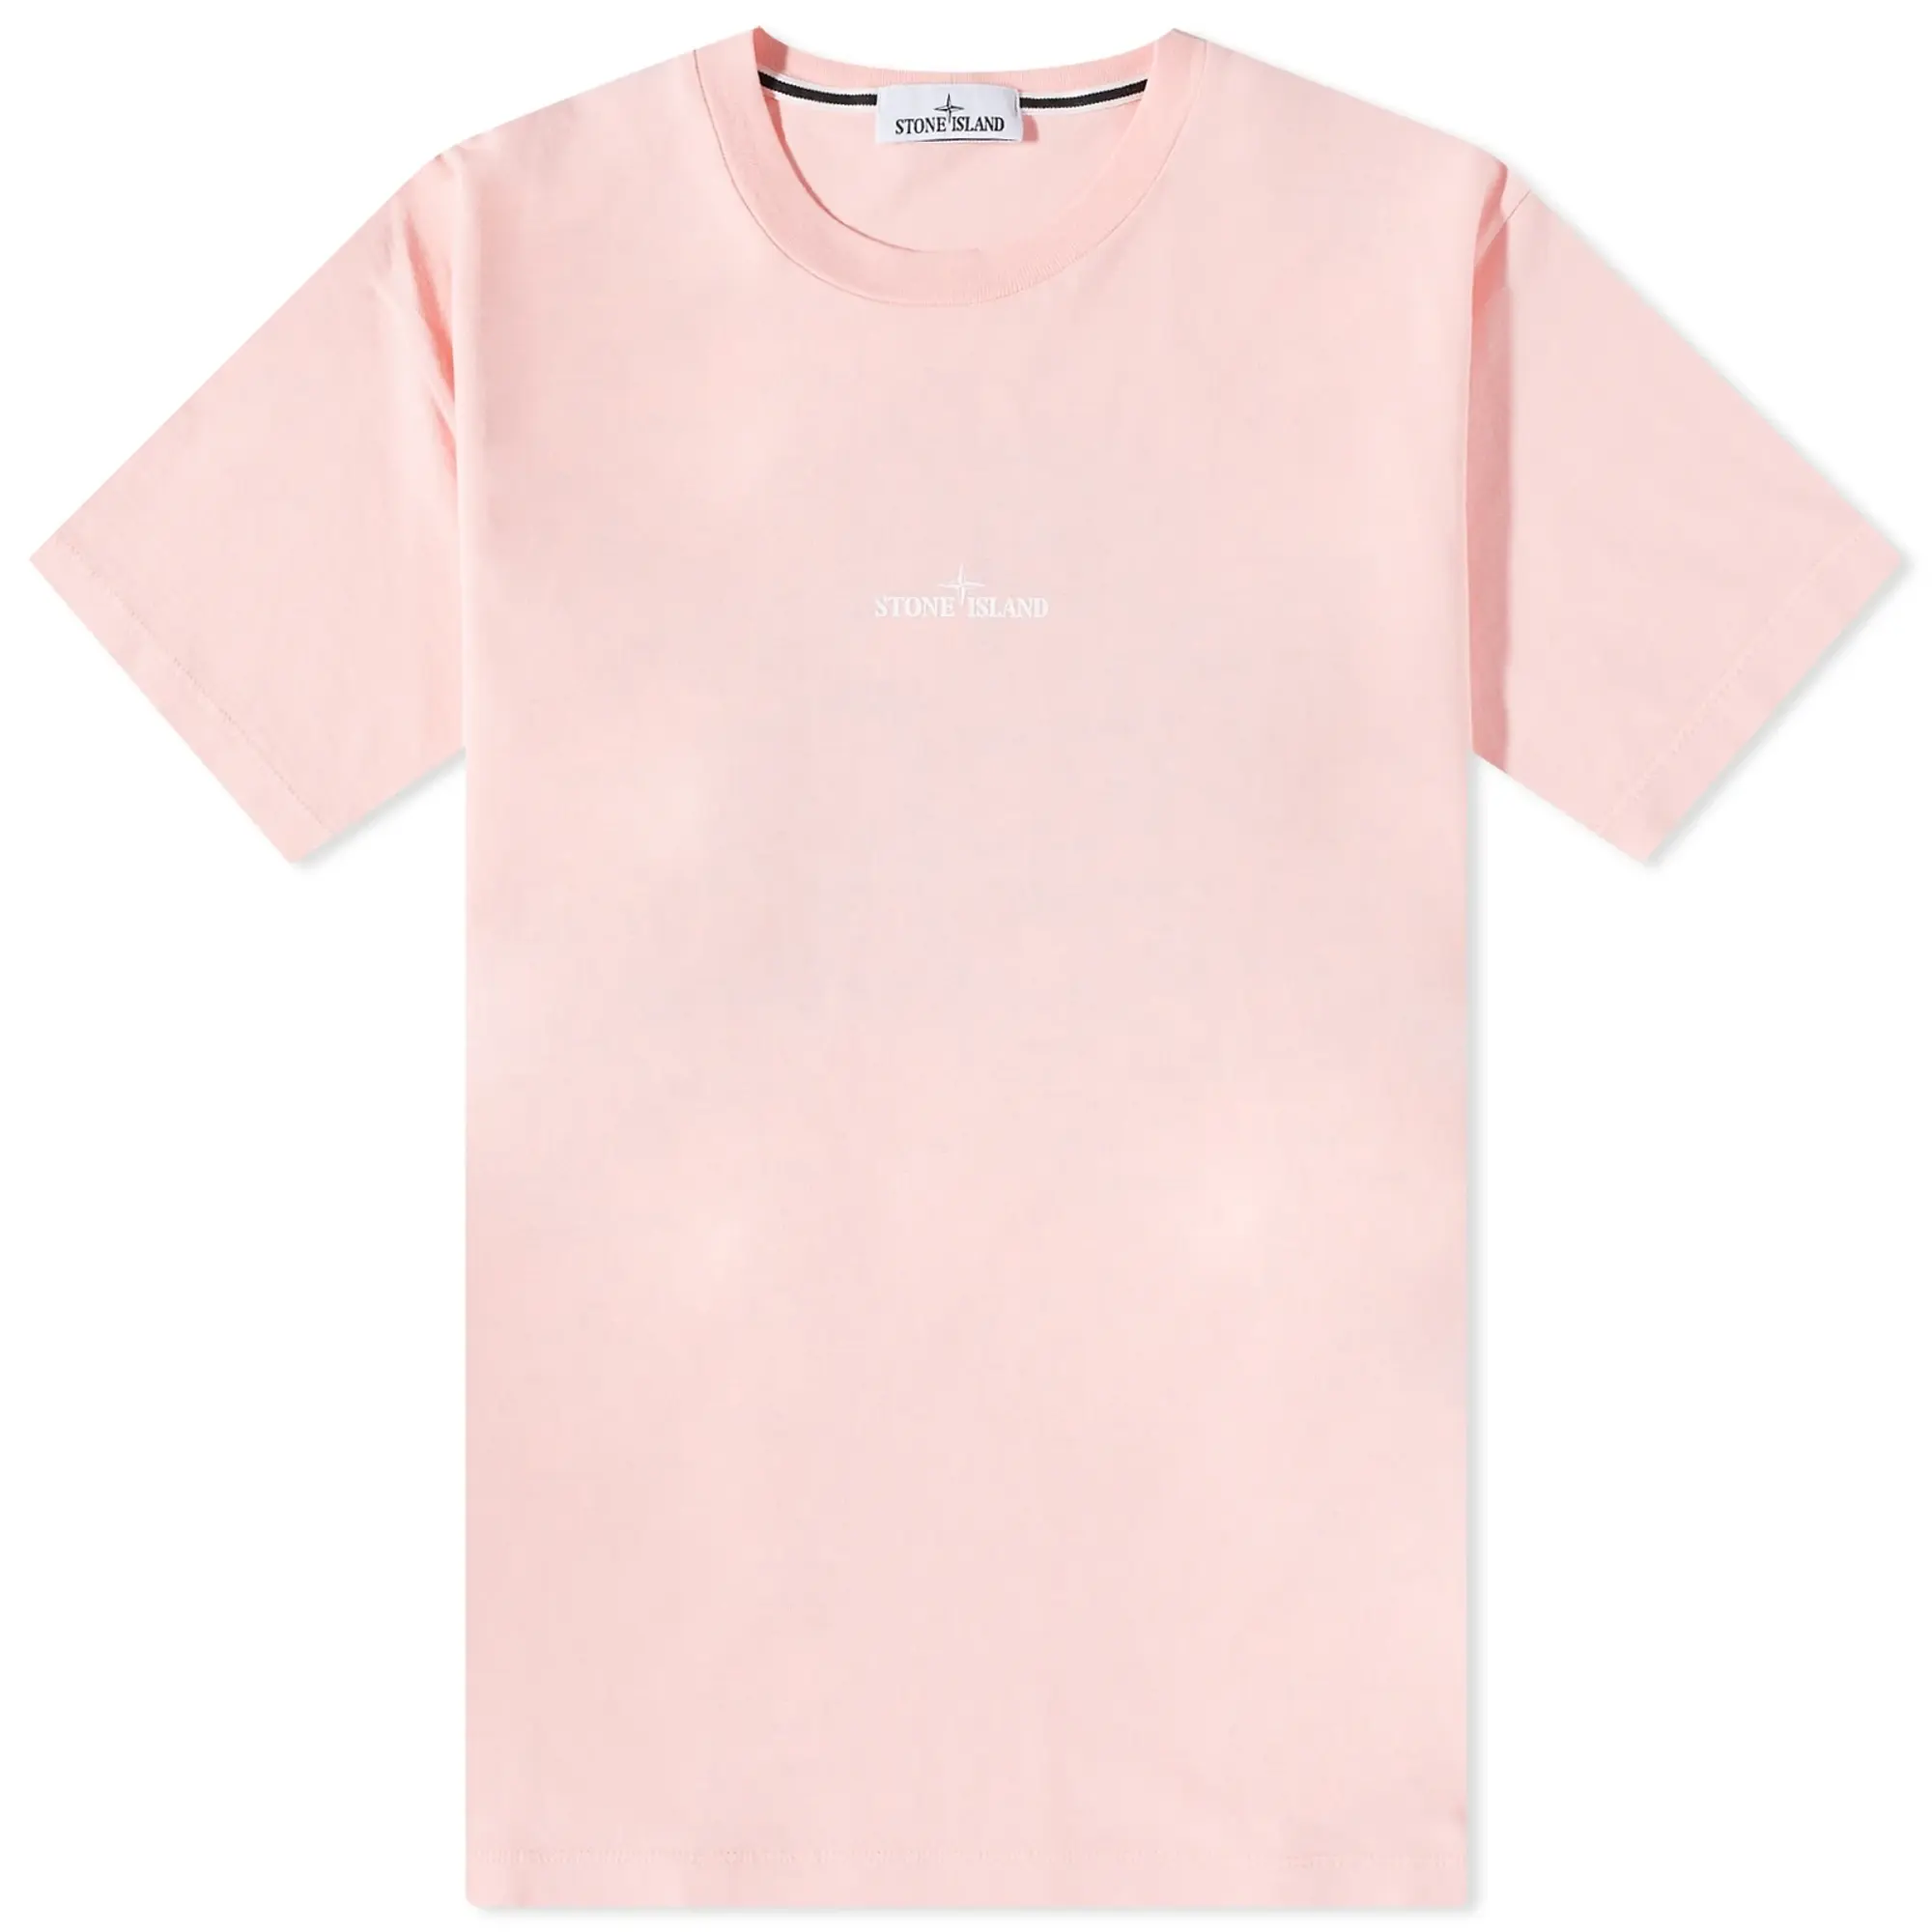 Stone Island Men's Institutional One Graphic T-Shirt Pink